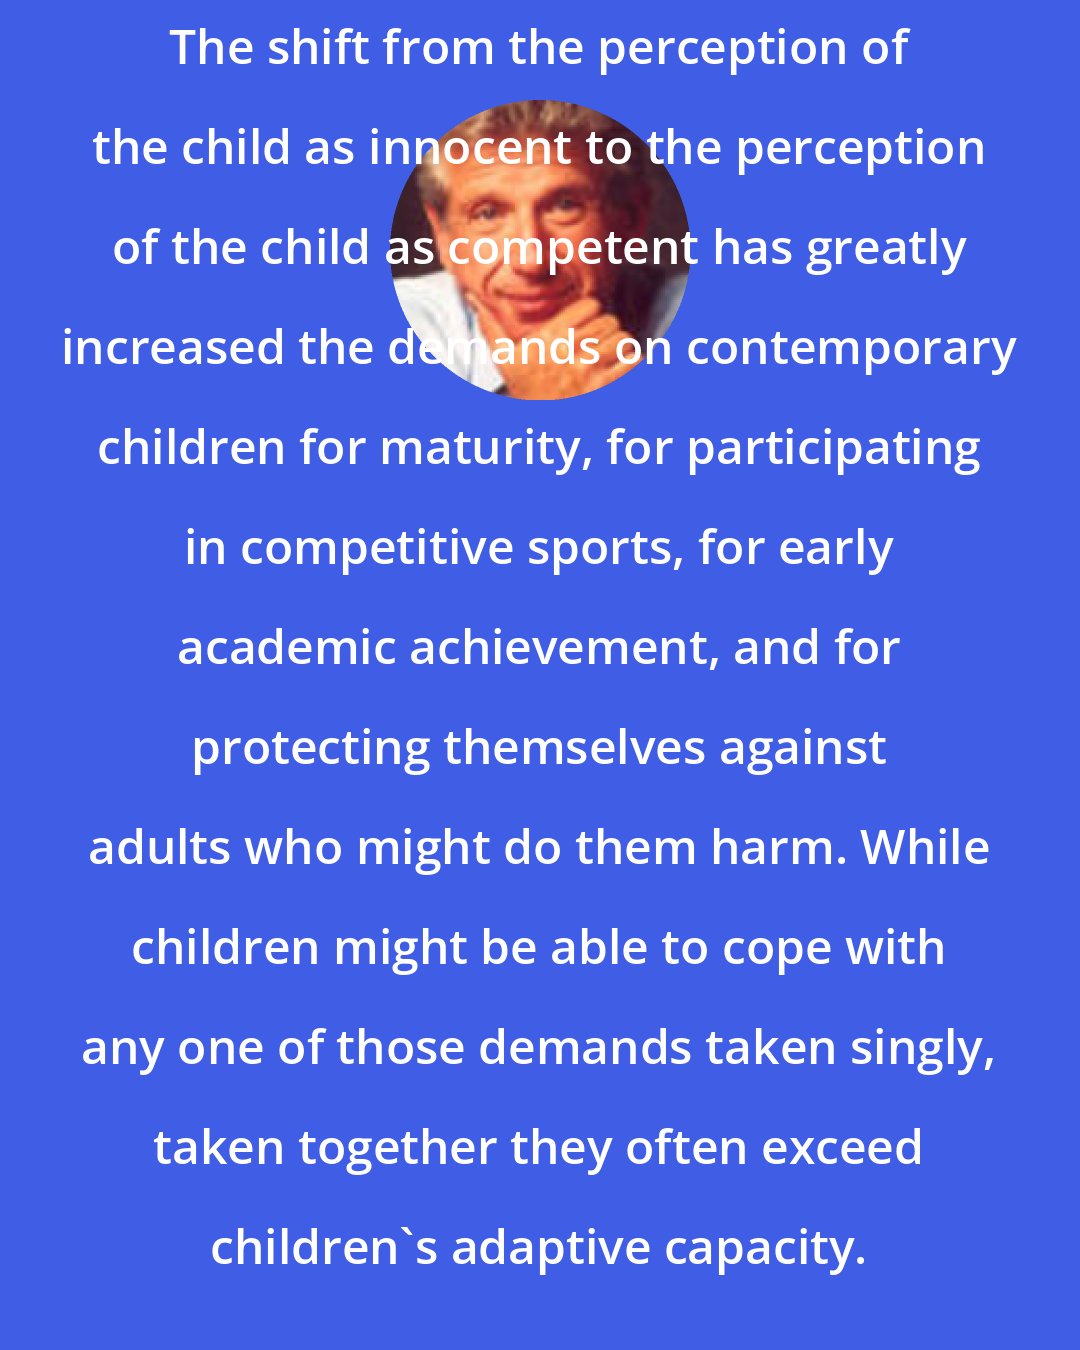 David Elkind: The shift from the perception of the child as innocent to the perception of the child as competent has greatly increased the demands on contemporary children for maturity, for participating in competitive sports, for early academic achievement, and for protecting themselves against adults who might do them harm. While children might be able to cope with any one of those demands taken singly, taken together they often exceed children's adaptive capacity.